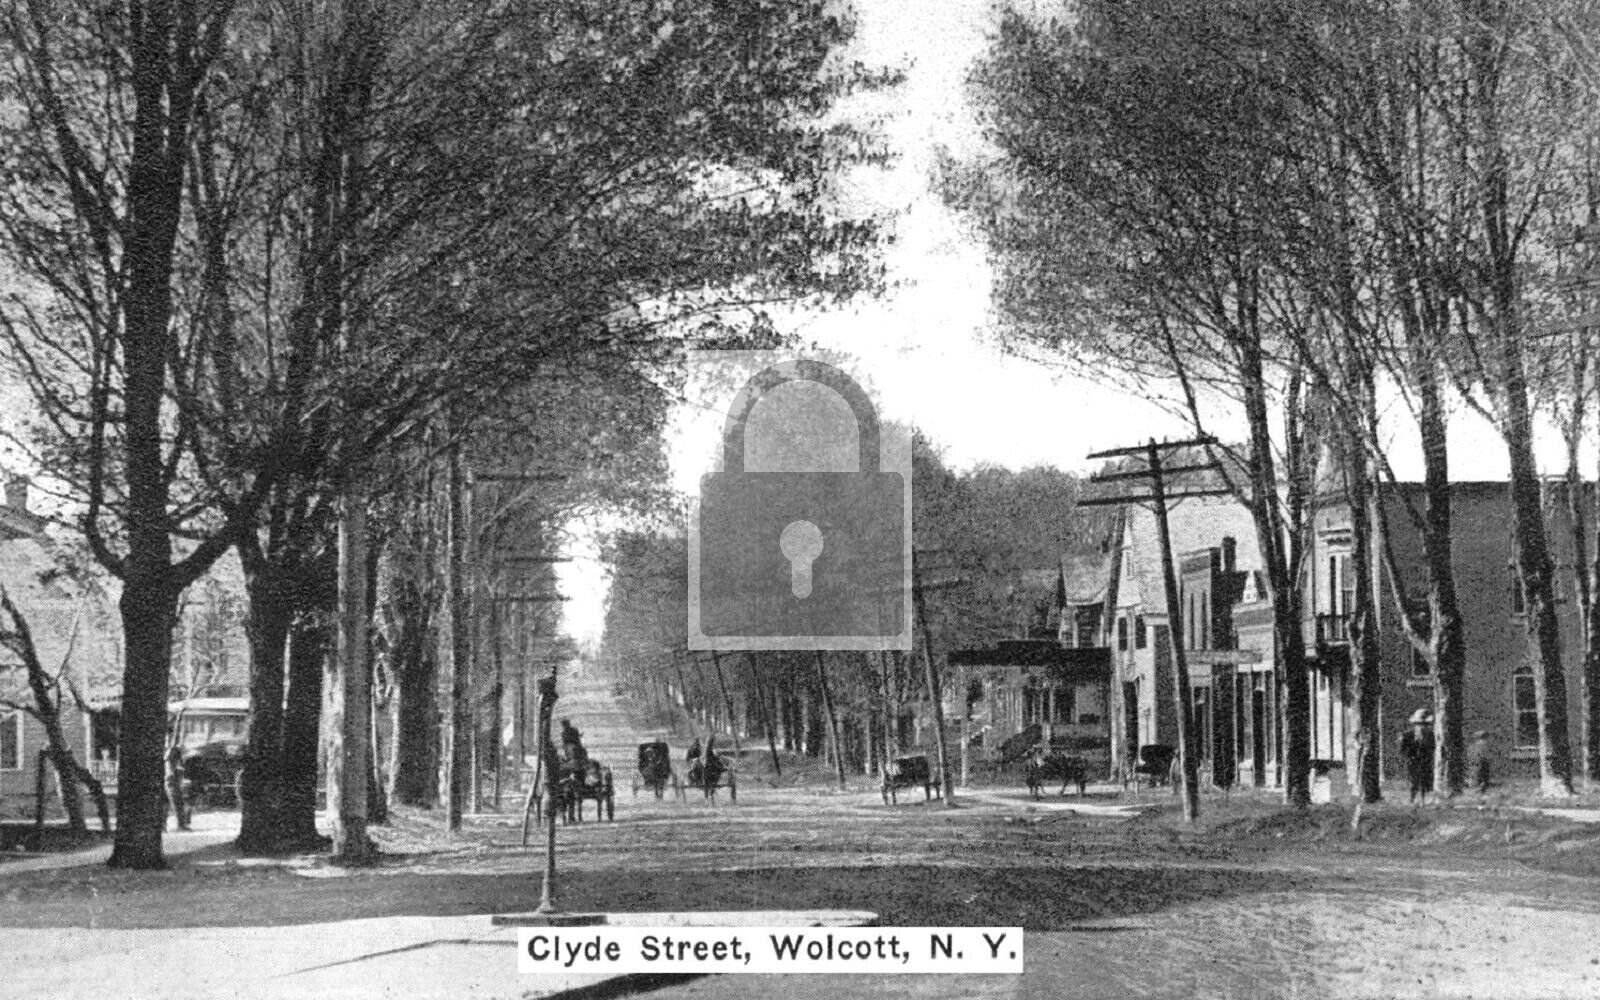 Clyde Street View Wolcott New York NY Postcard REPRINT